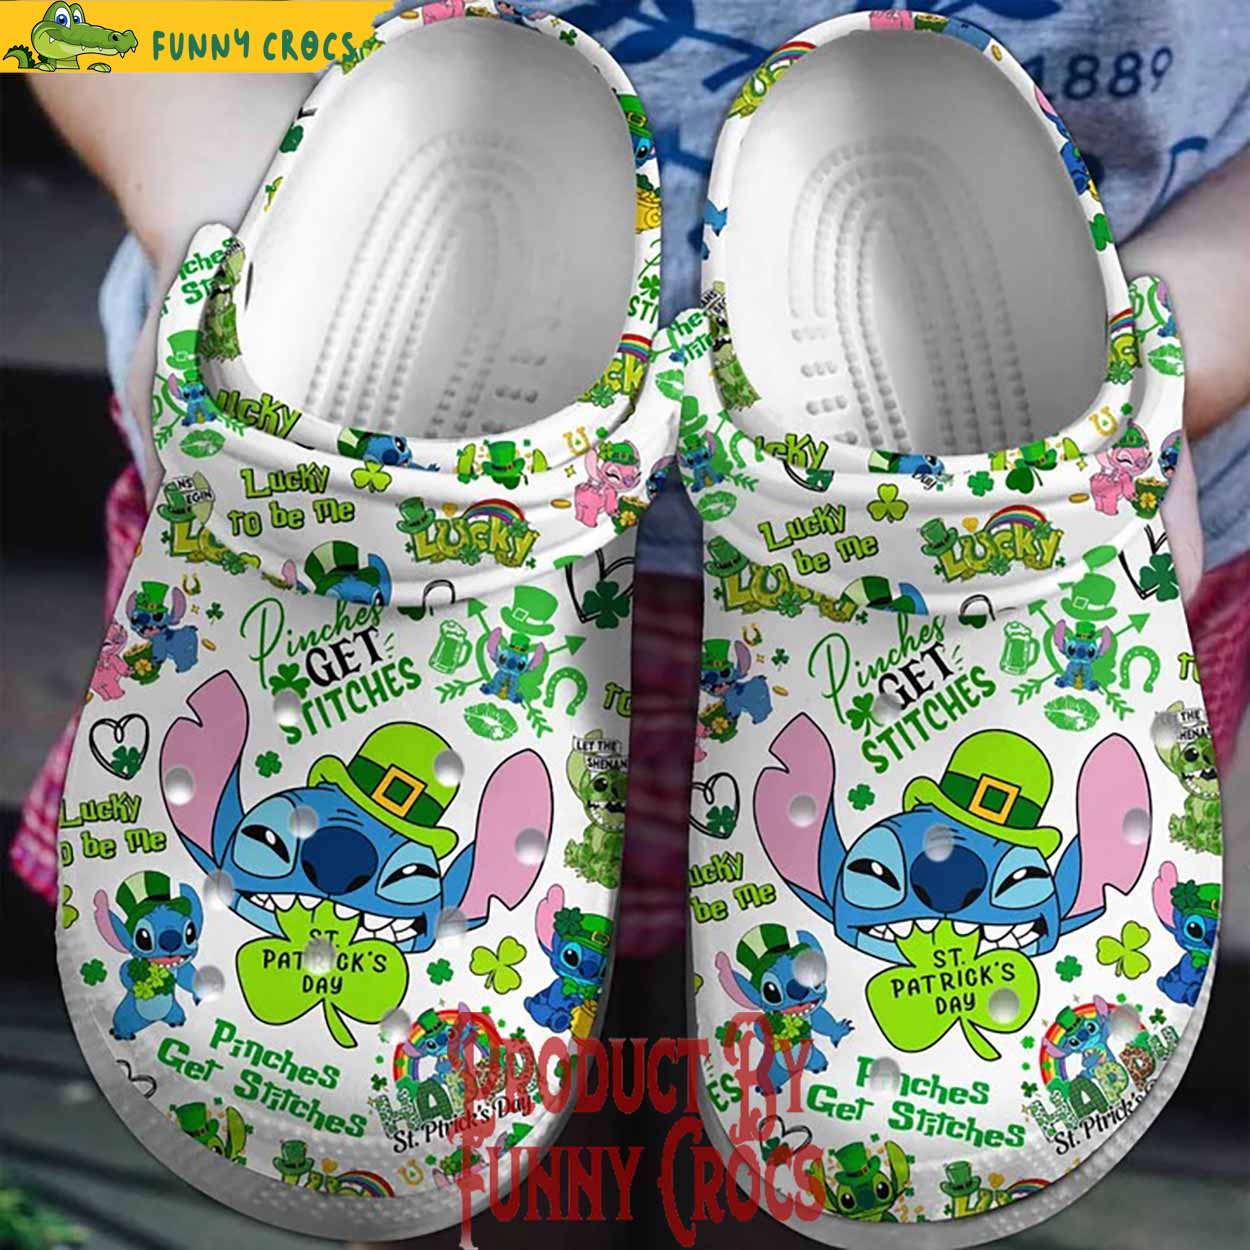 Pinches Get Stitches St.Patrick's Day Crocs Shoes